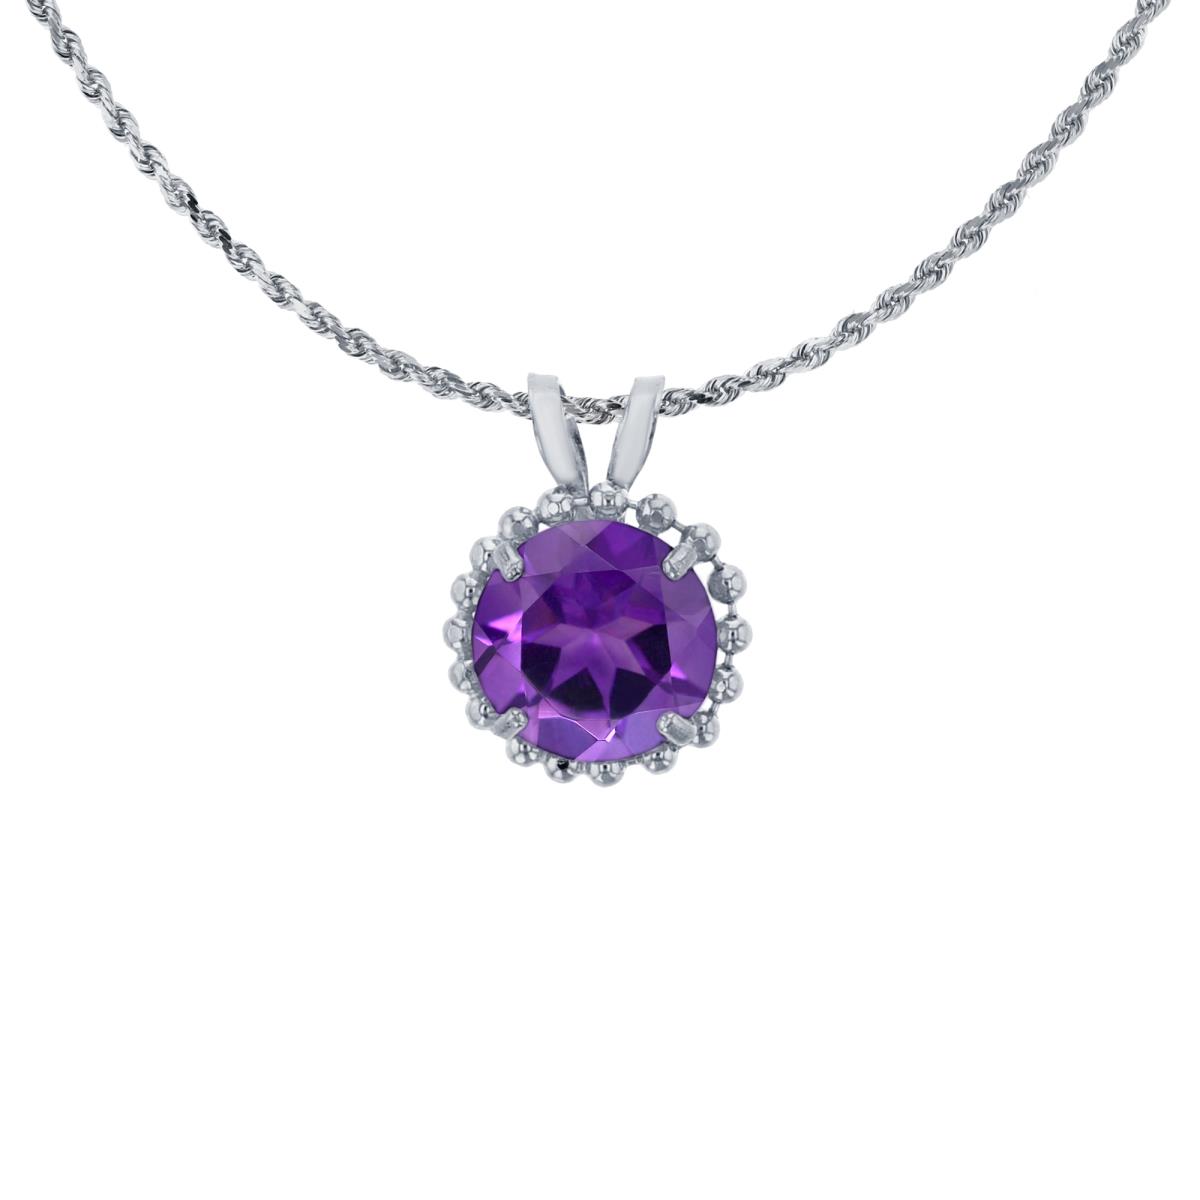 10K White Gold 6mm Rd Cut Amethyst with Bead Frame Rabbit Ear 18" Necklace